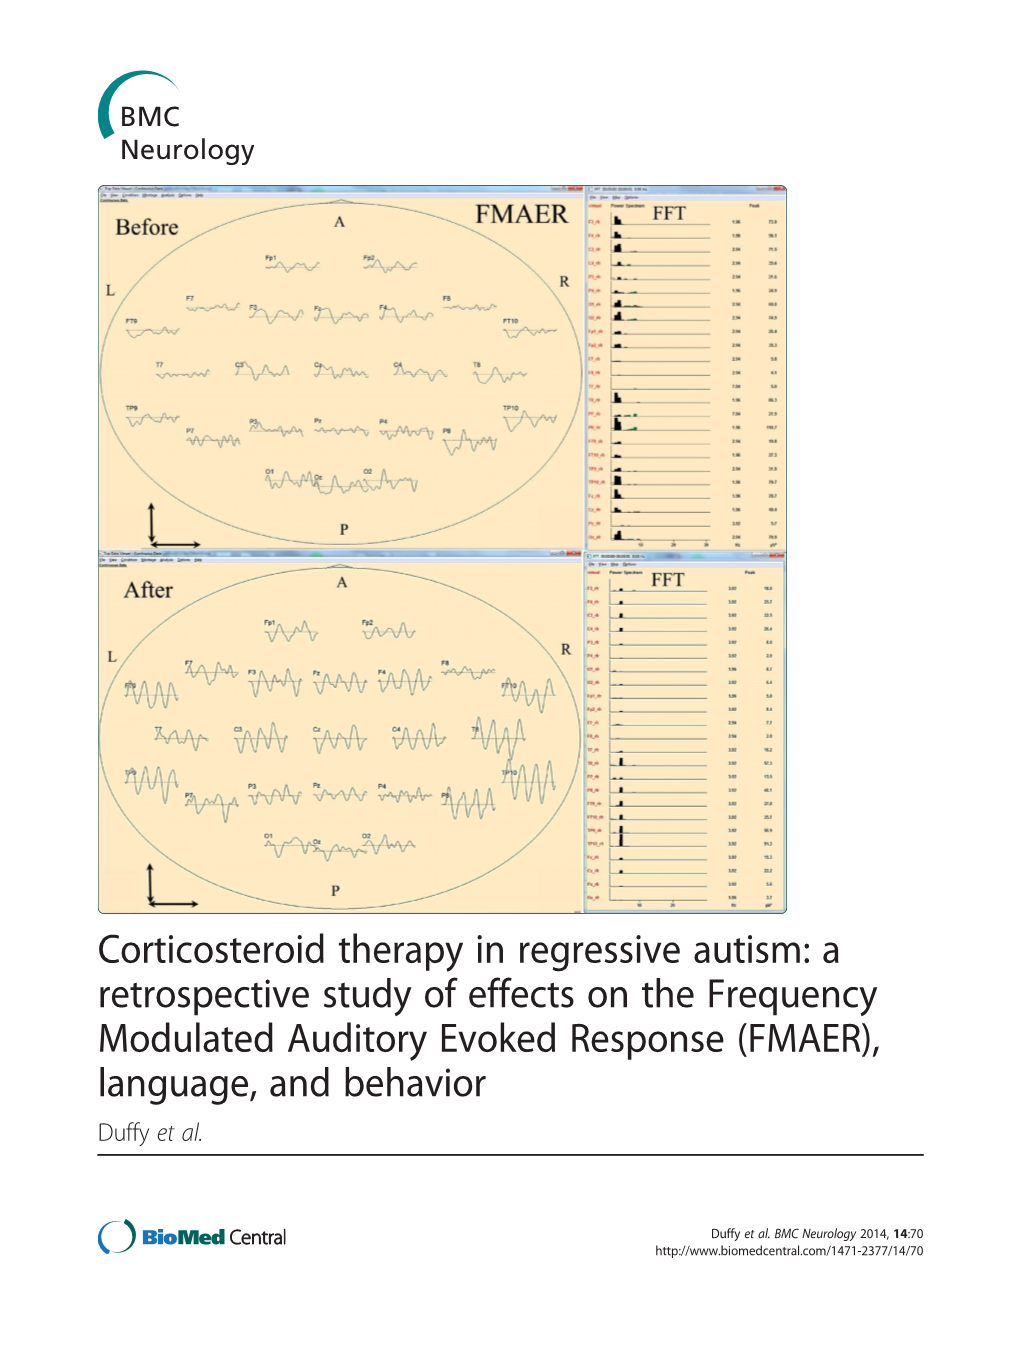 Corticosteroid Therapy in Regressive Autism: a Retrospective Study of Effects on the Frequency Modulated Auditory Evoked Respons